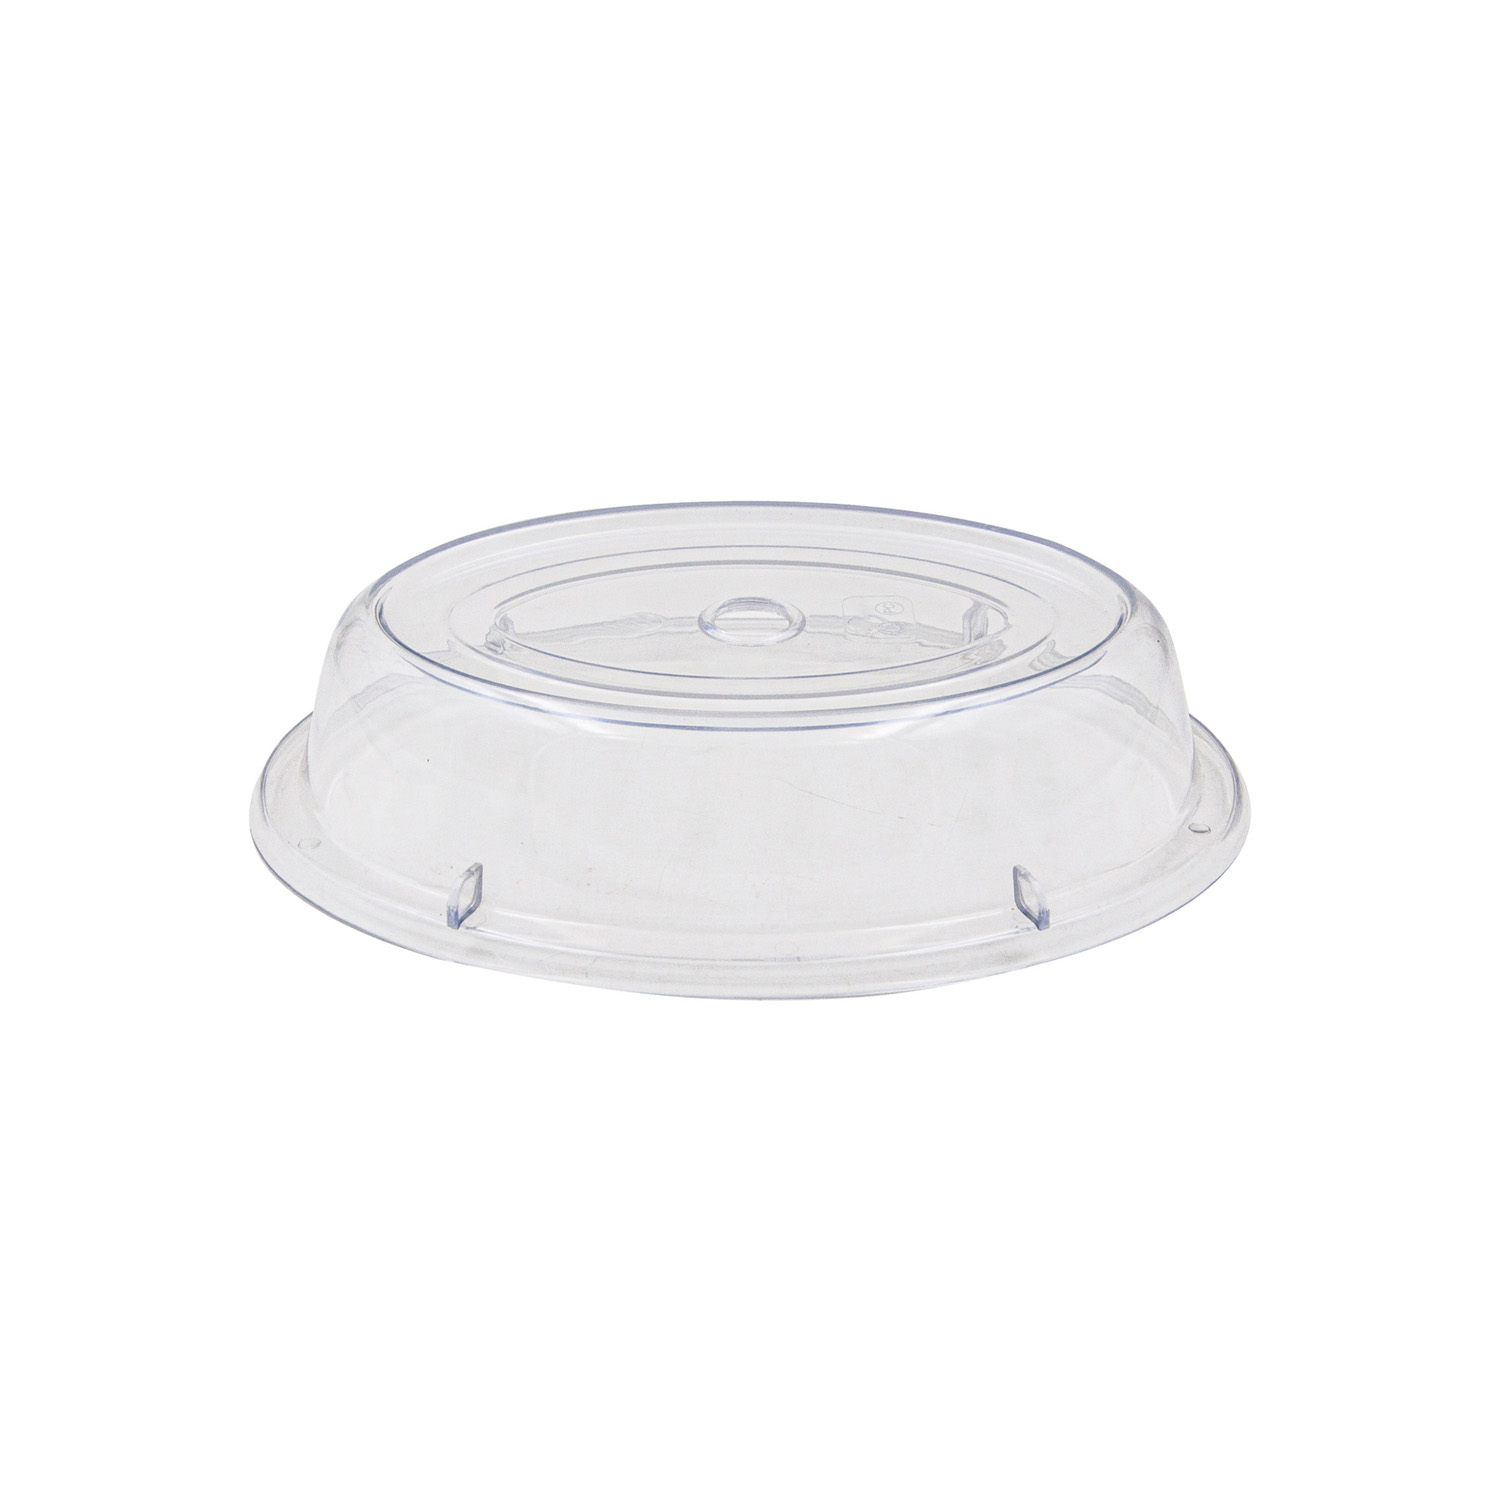 CAC China PPCO-13 Clear Polycarbonate Oval Plate Cover 12"